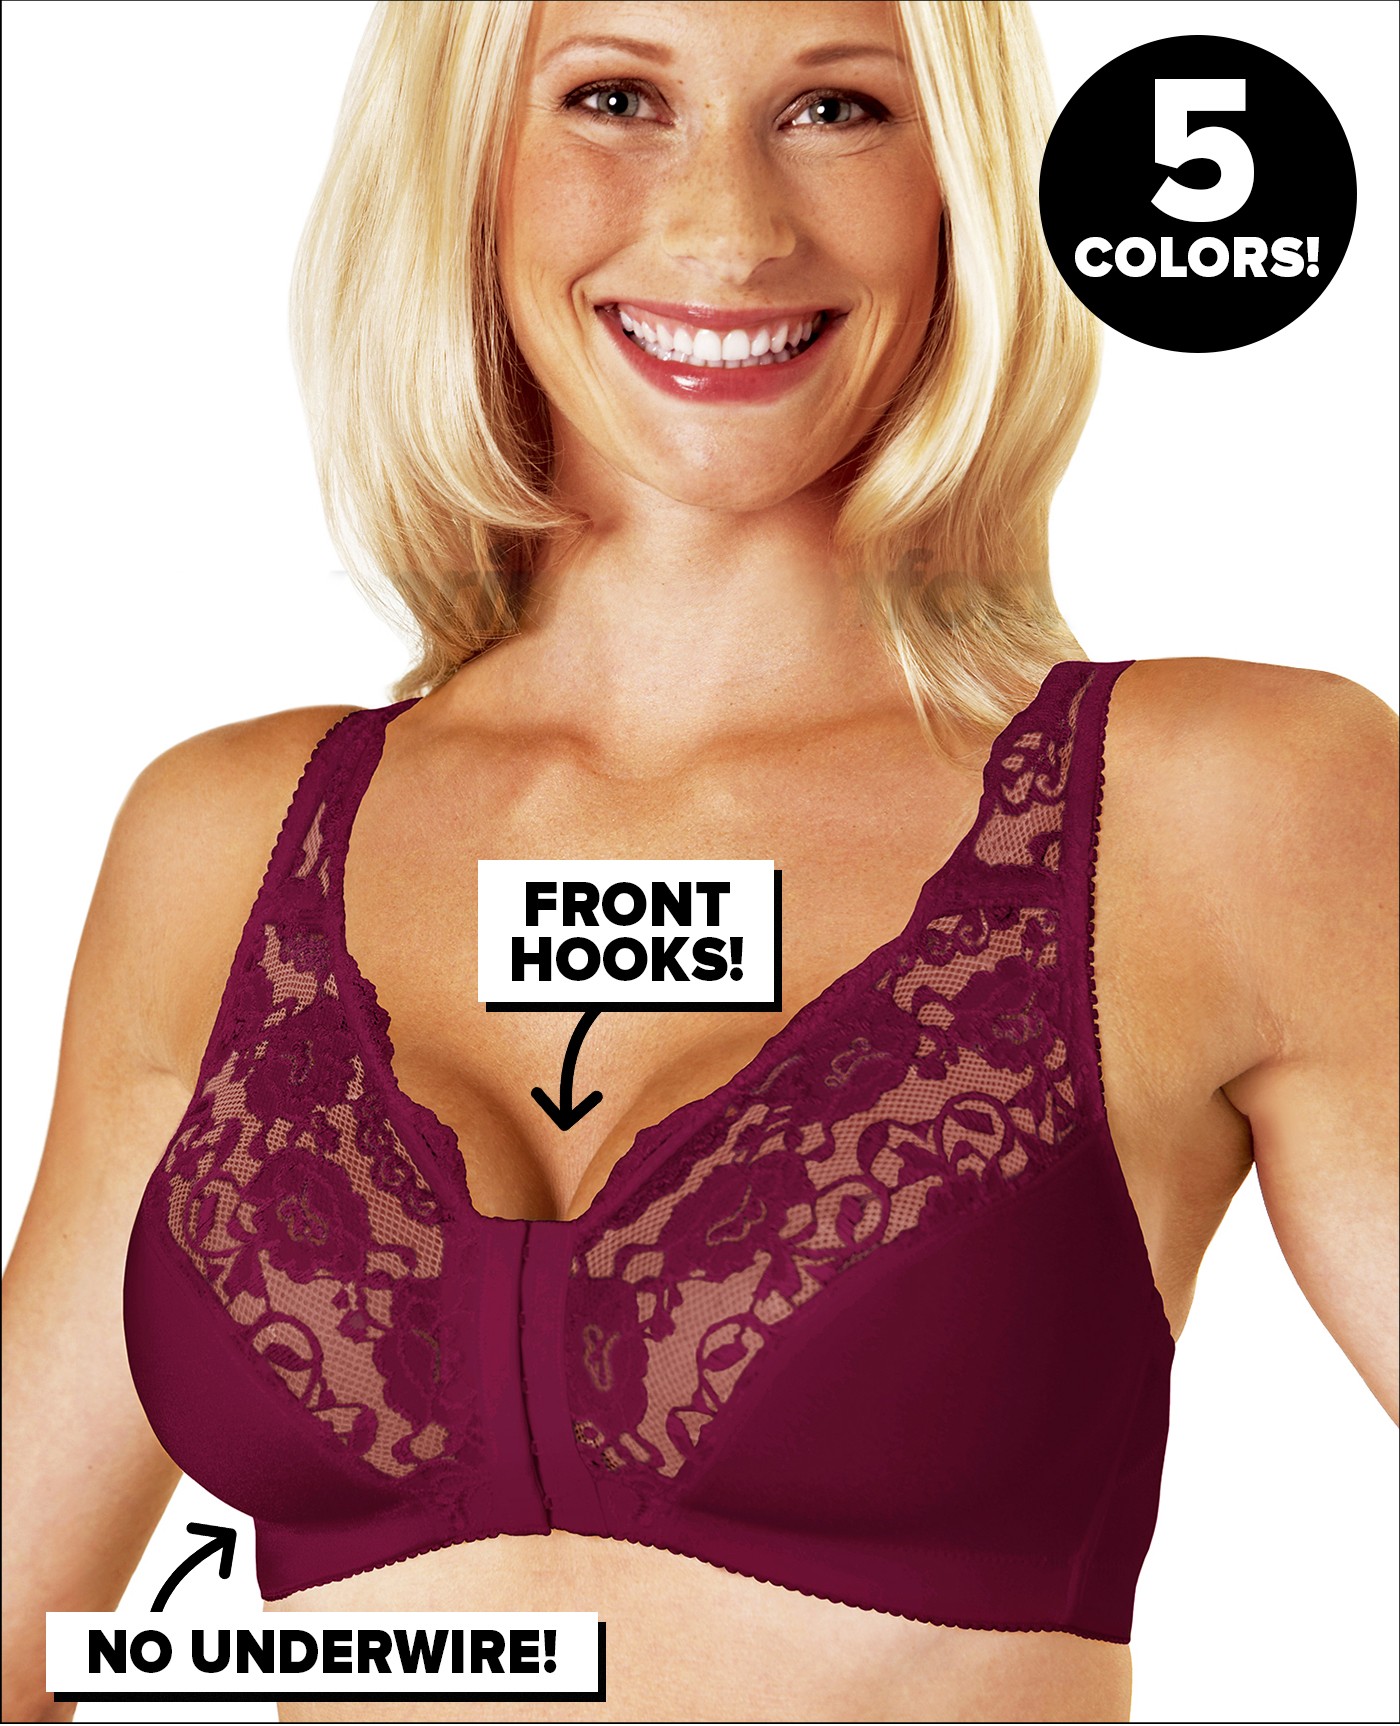 Front hooks and no underwire